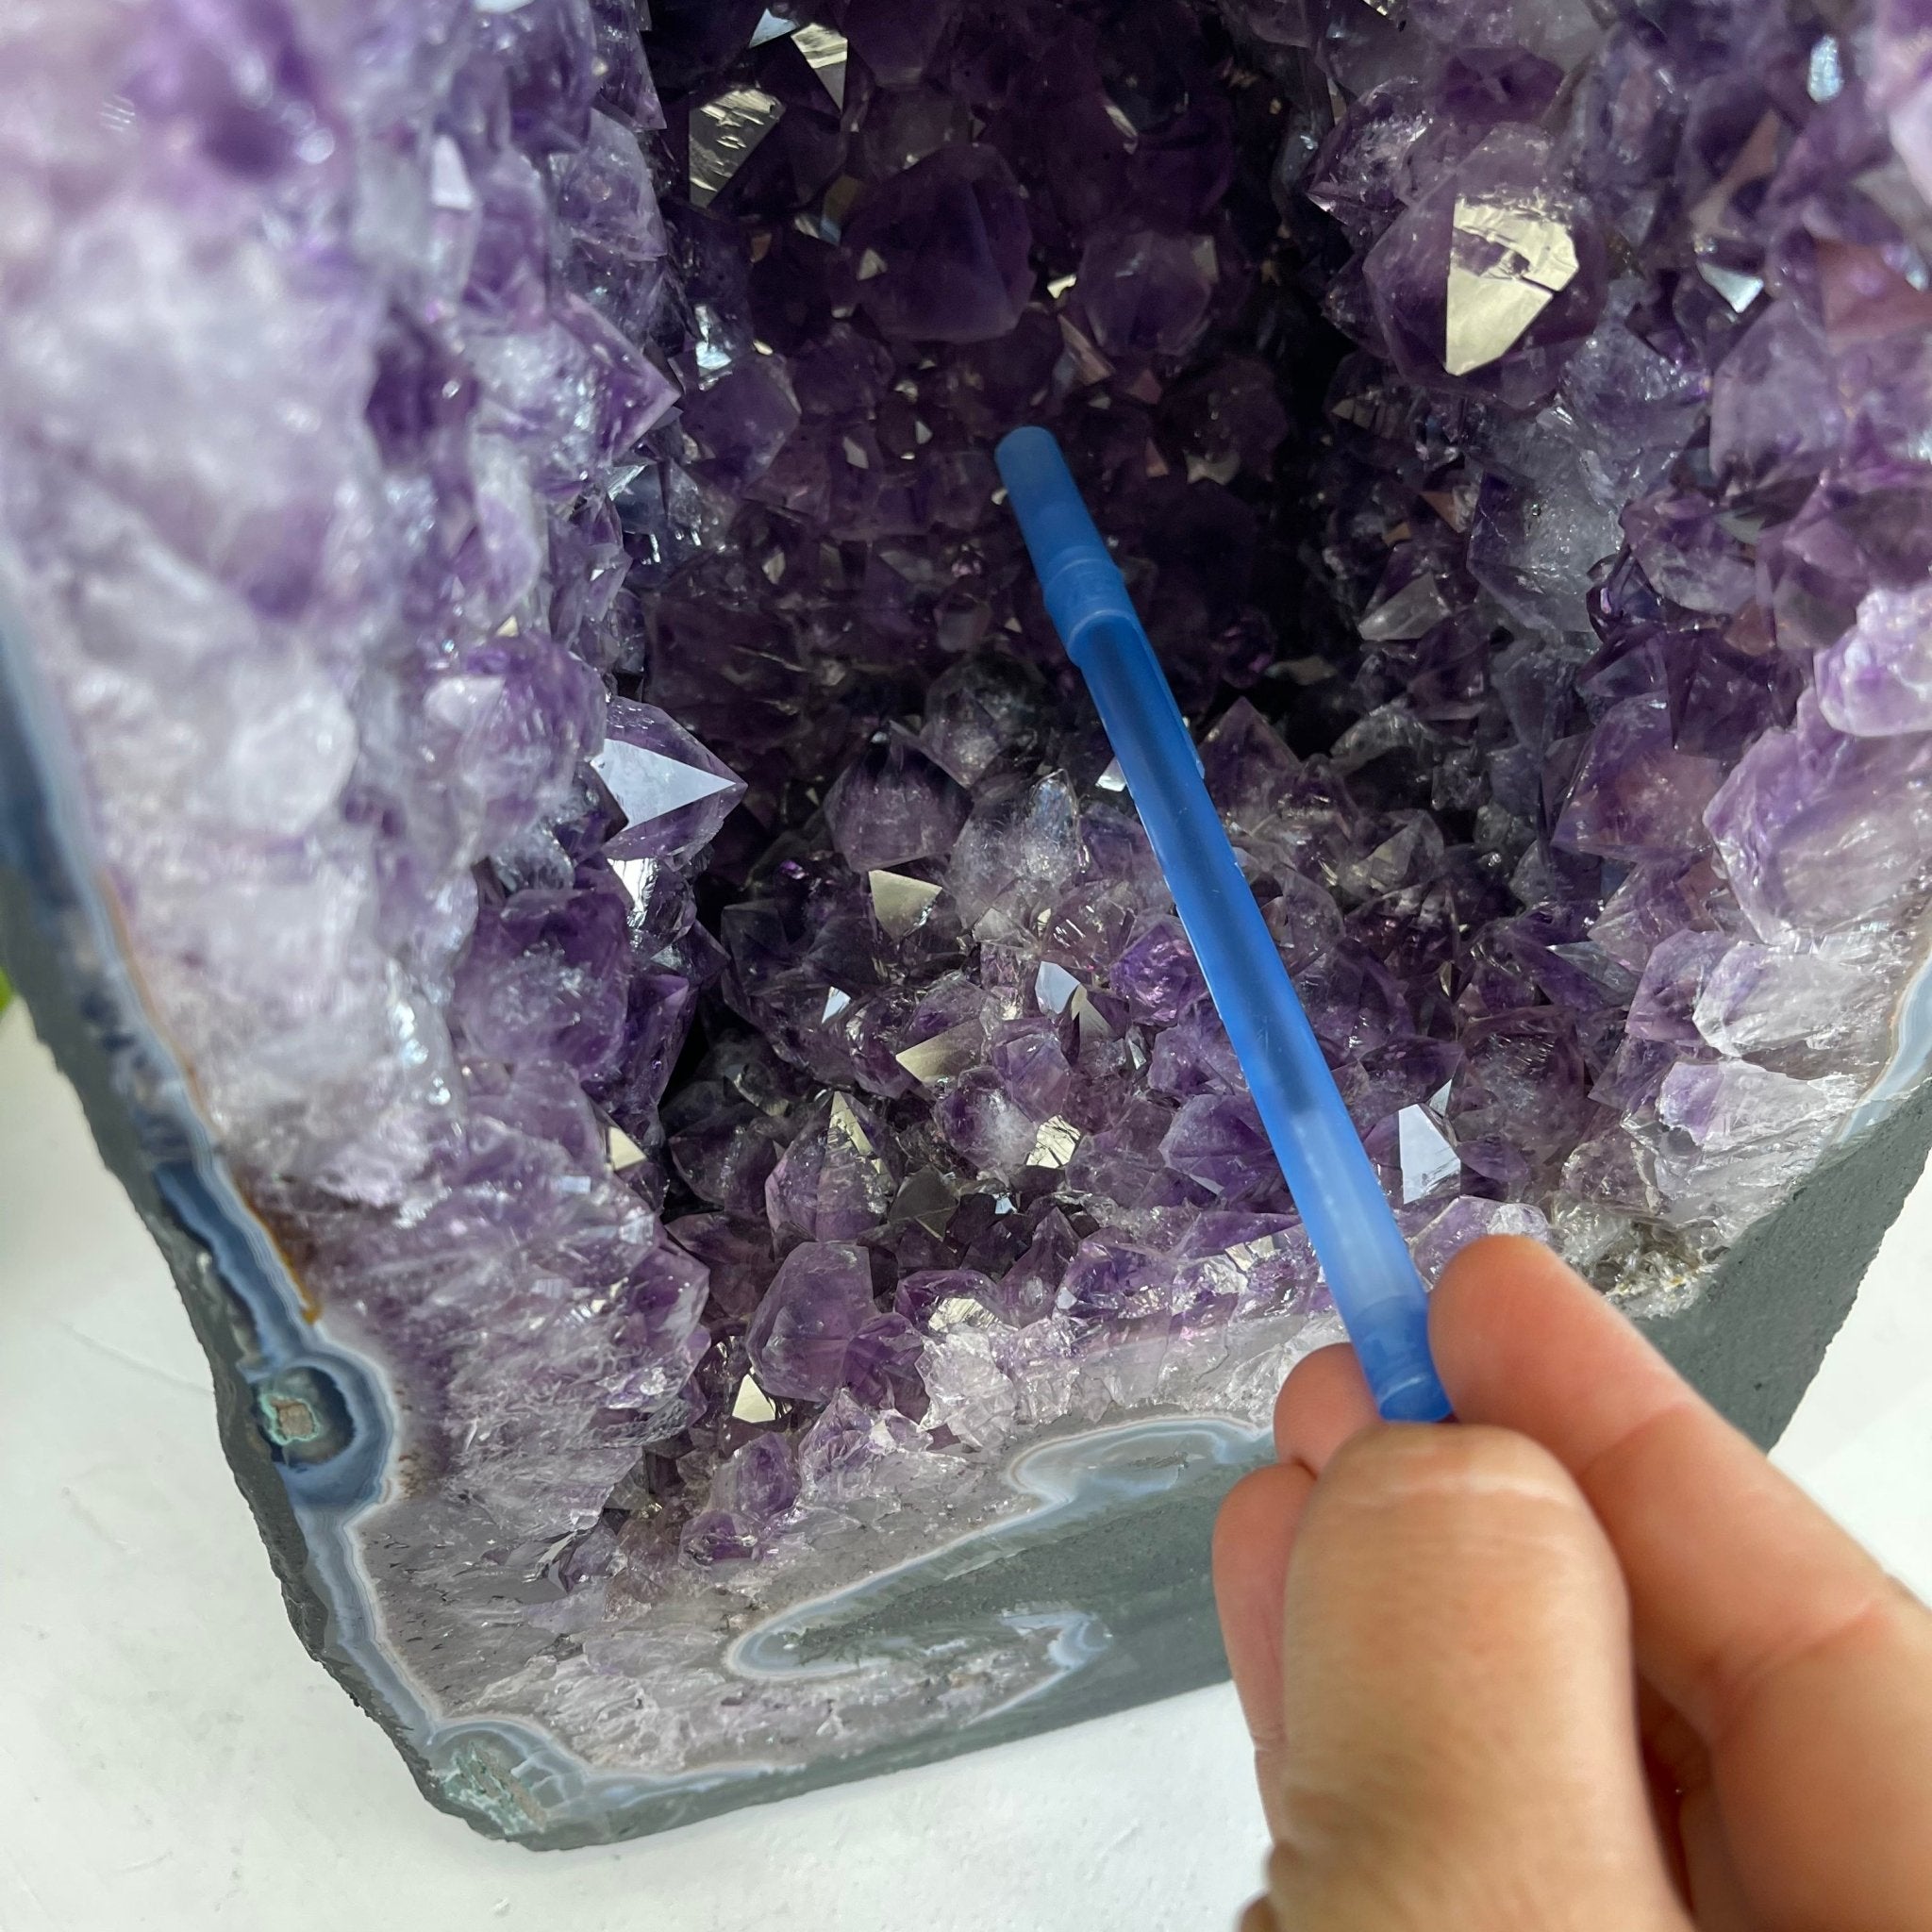 Extra Quality Brazilian Amethyst Cathedral, 78.2 lbs & 28.8" Tall #5601-0707 by Brazil Gems - Brazil GemsBrazil GemsExtra Quality Brazilian Amethyst Cathedral, 78.2 lbs & 28.8" Tall #5601-0707 by Brazil GemsCathedrals5601-0707